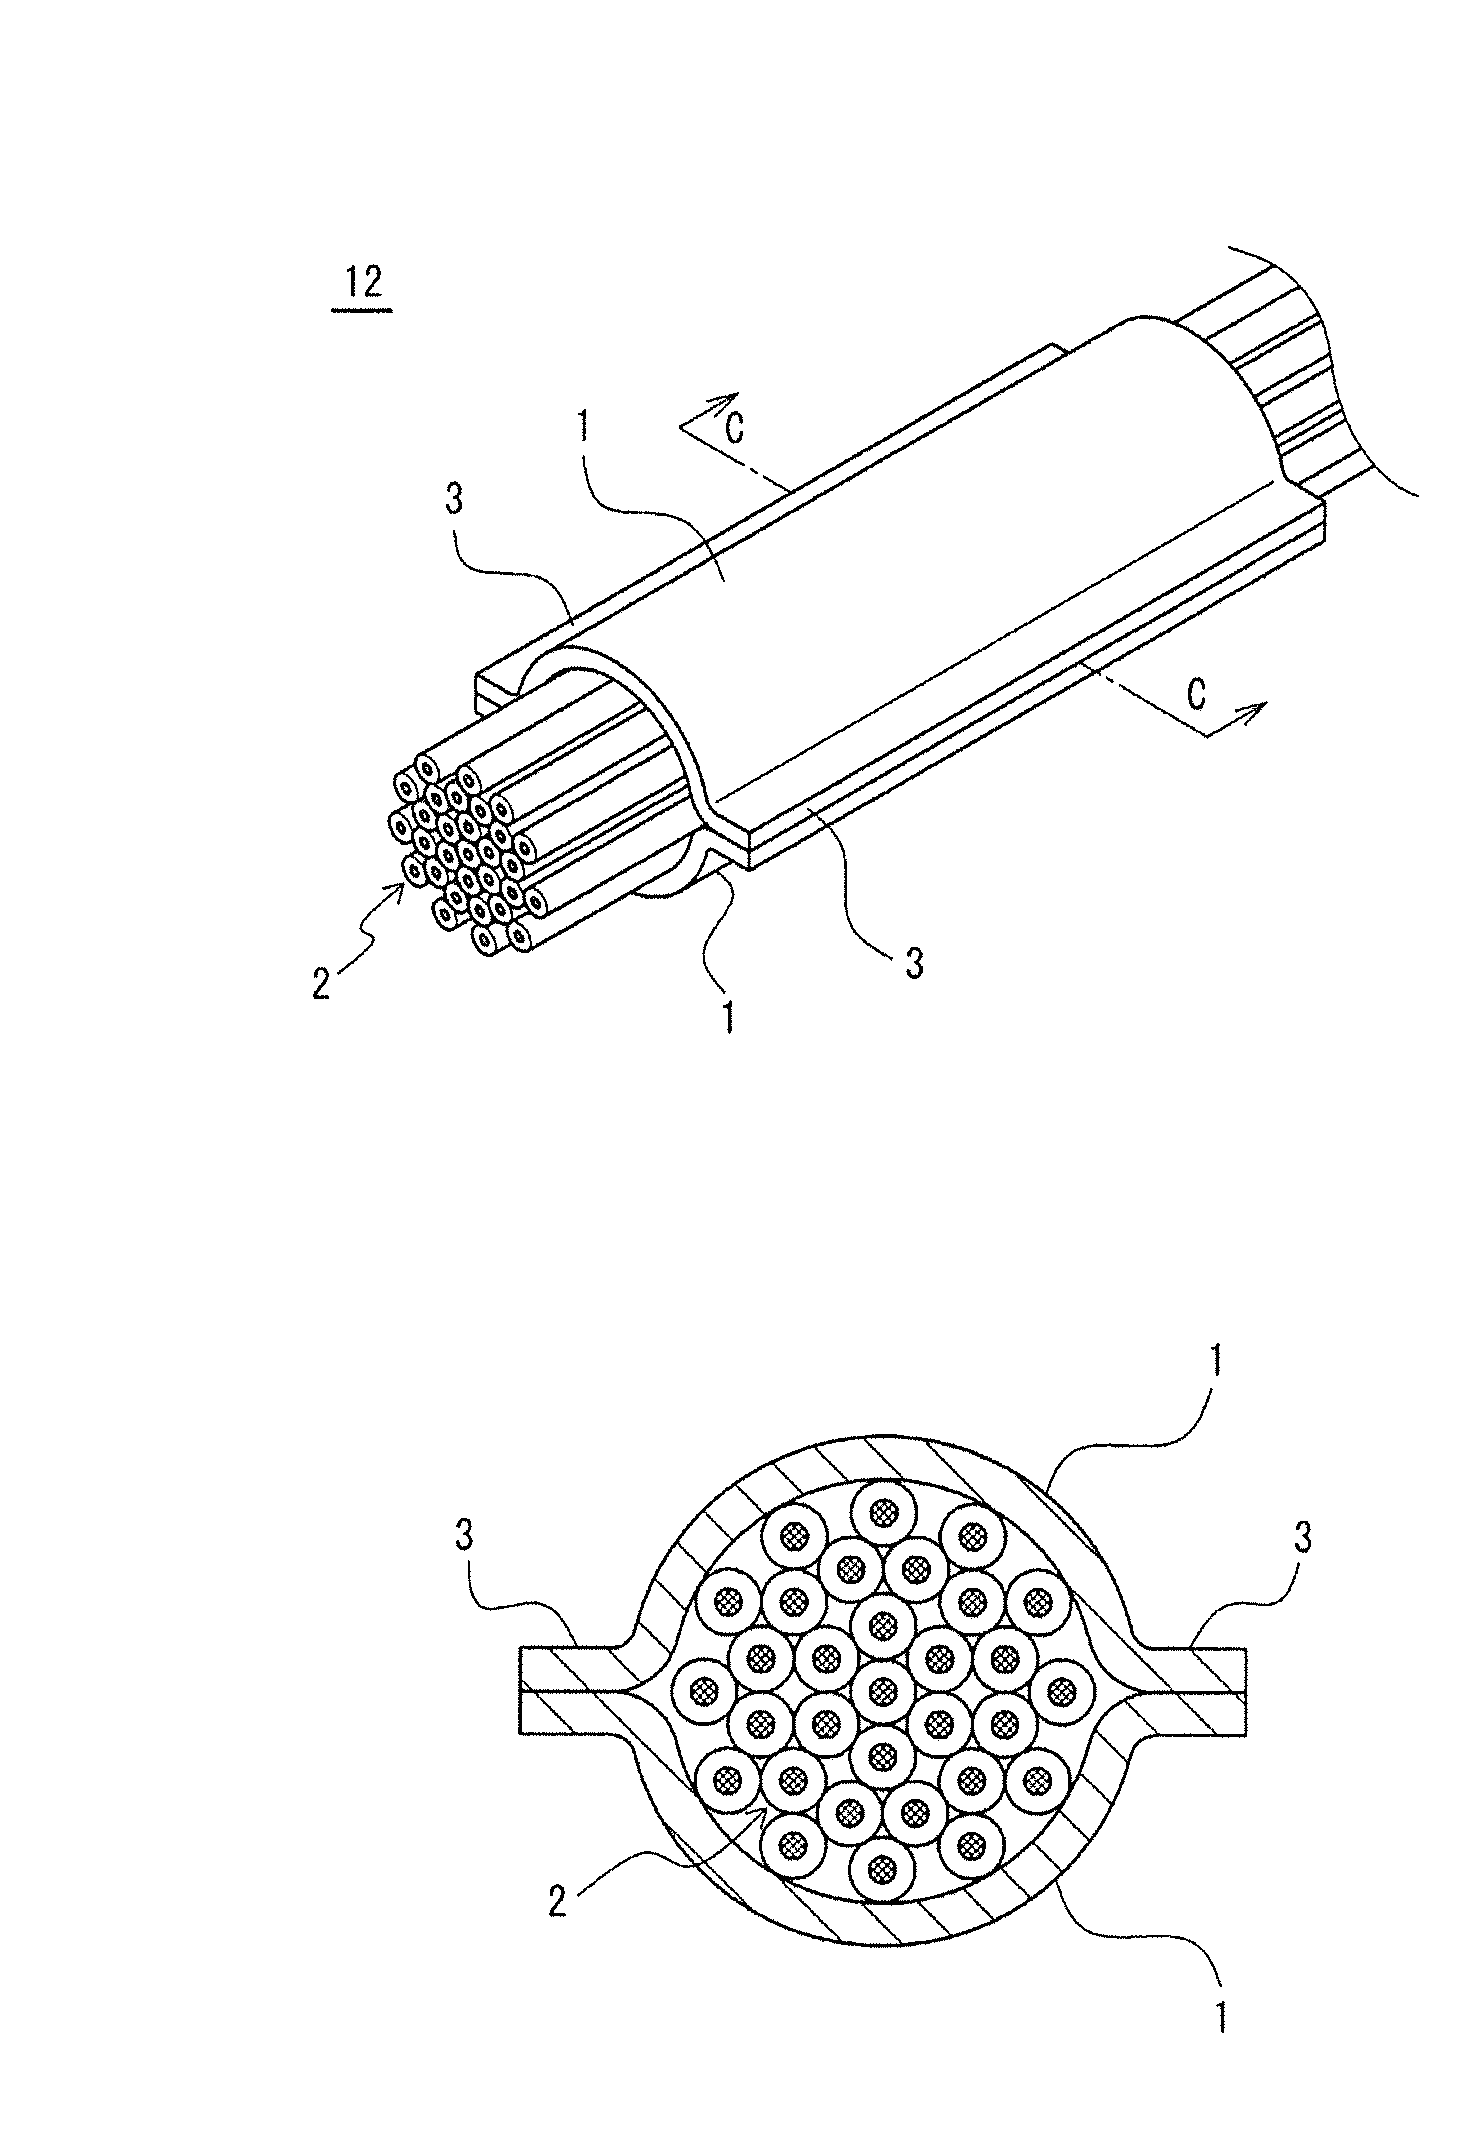 Wiring harness with sound absorber